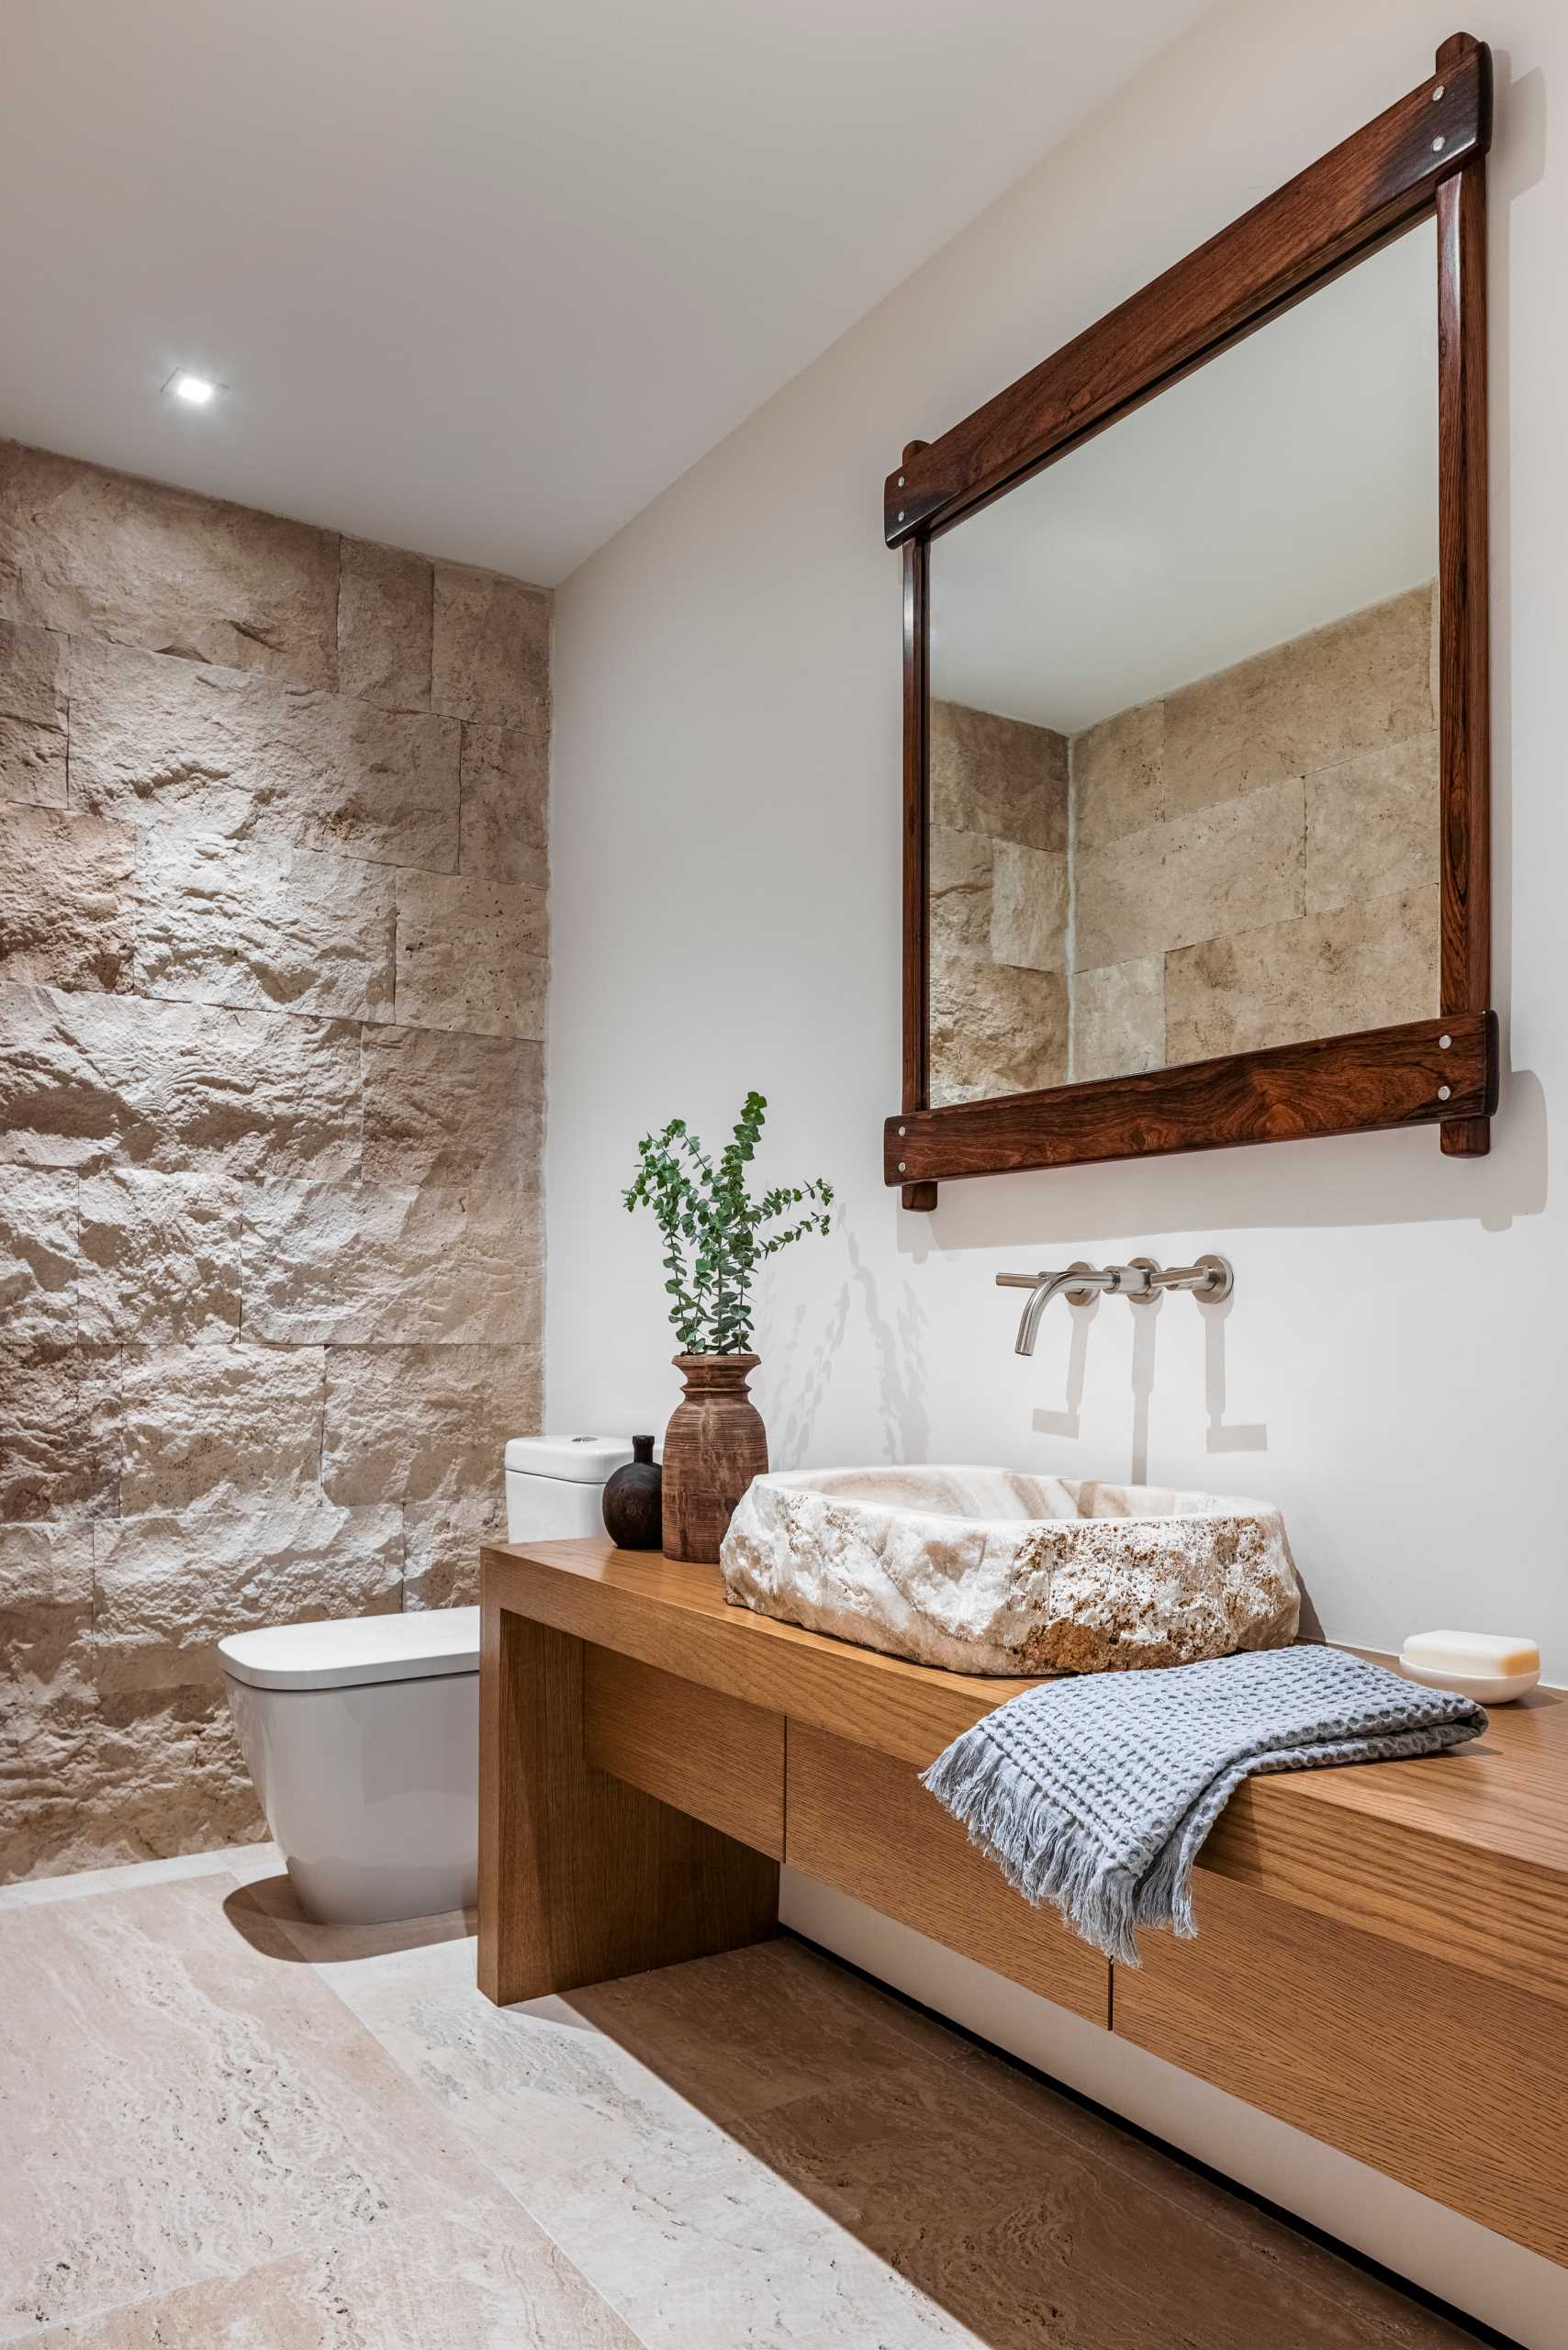 In this modern primary bathroom, the wall and custom basin are made from the same Jerusalem stone as the exterior.